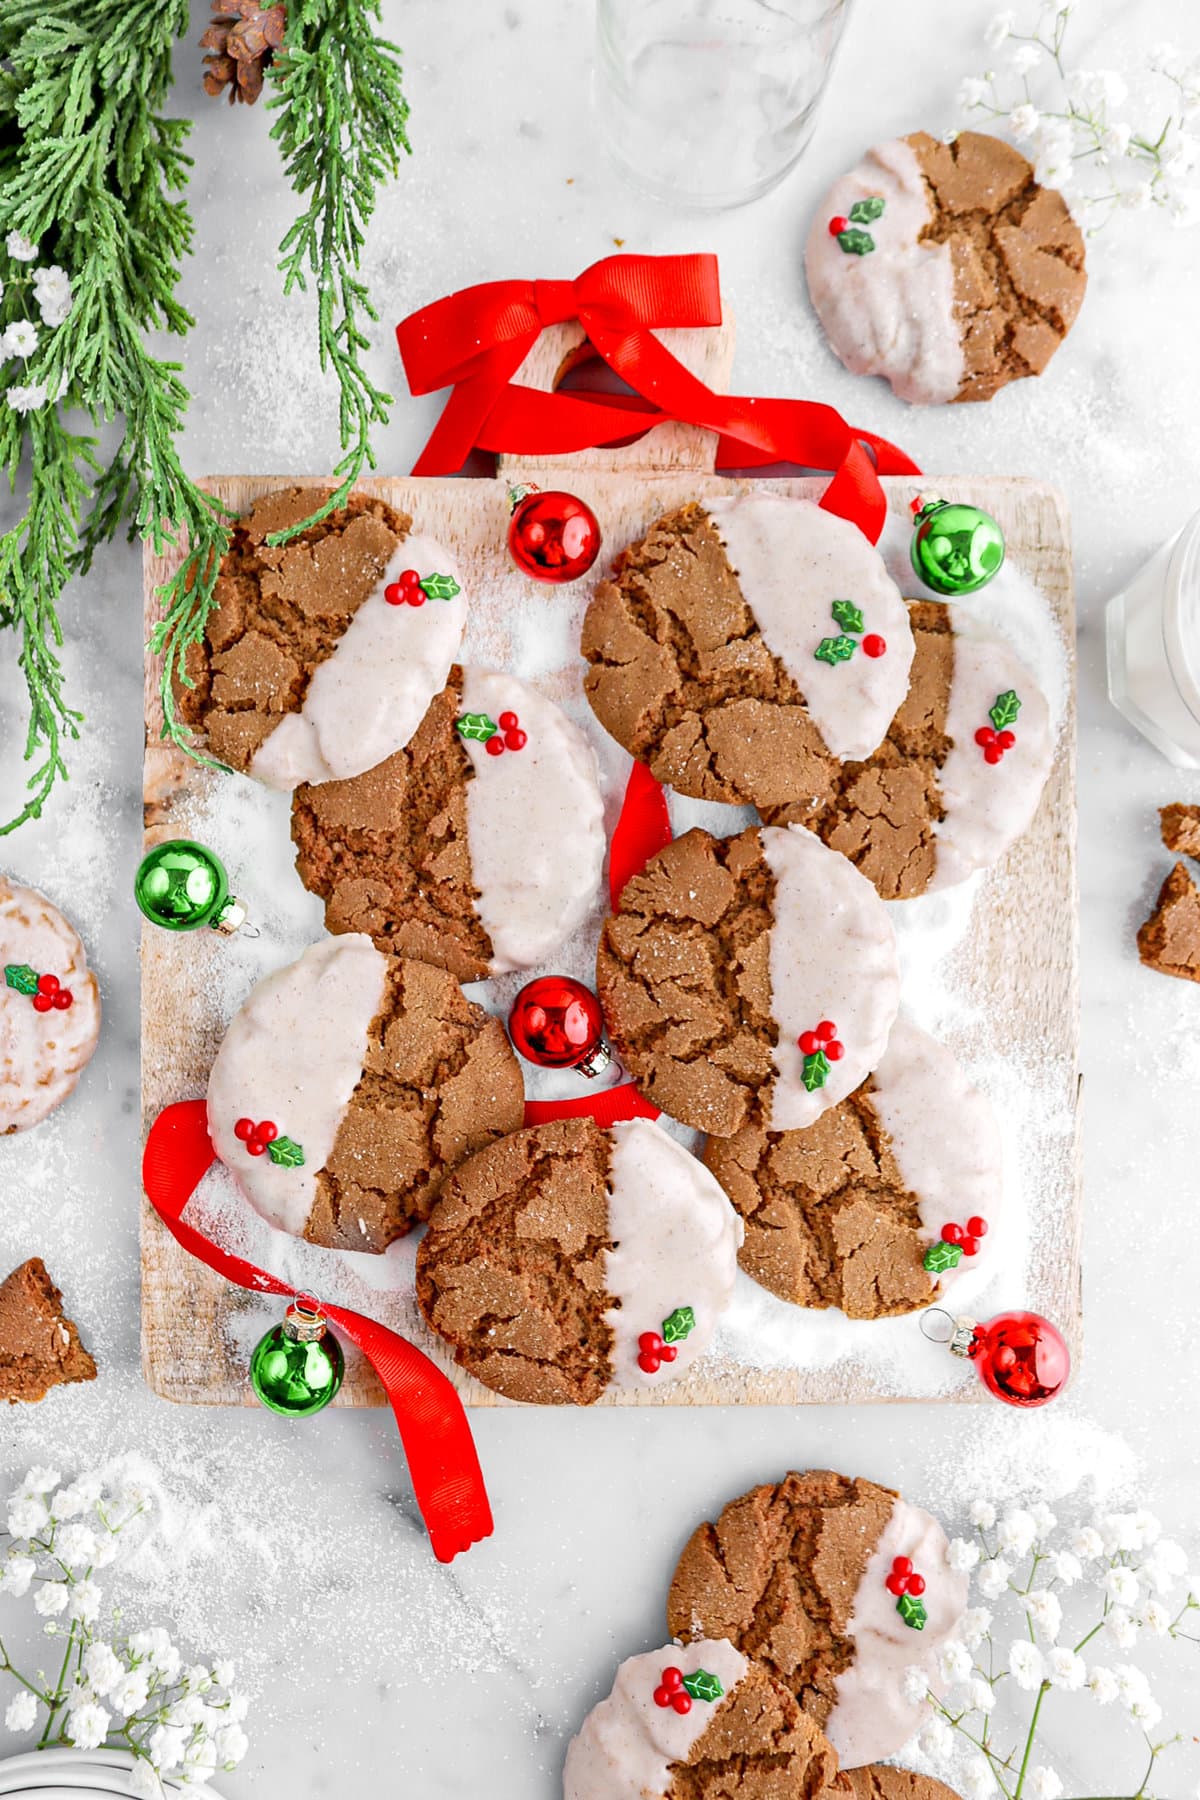 overhead image of gingerbread crinkle cookies on square wood board with mini green and red ornaments around, red ribbon, greenery, and white flowers around on marble surface.